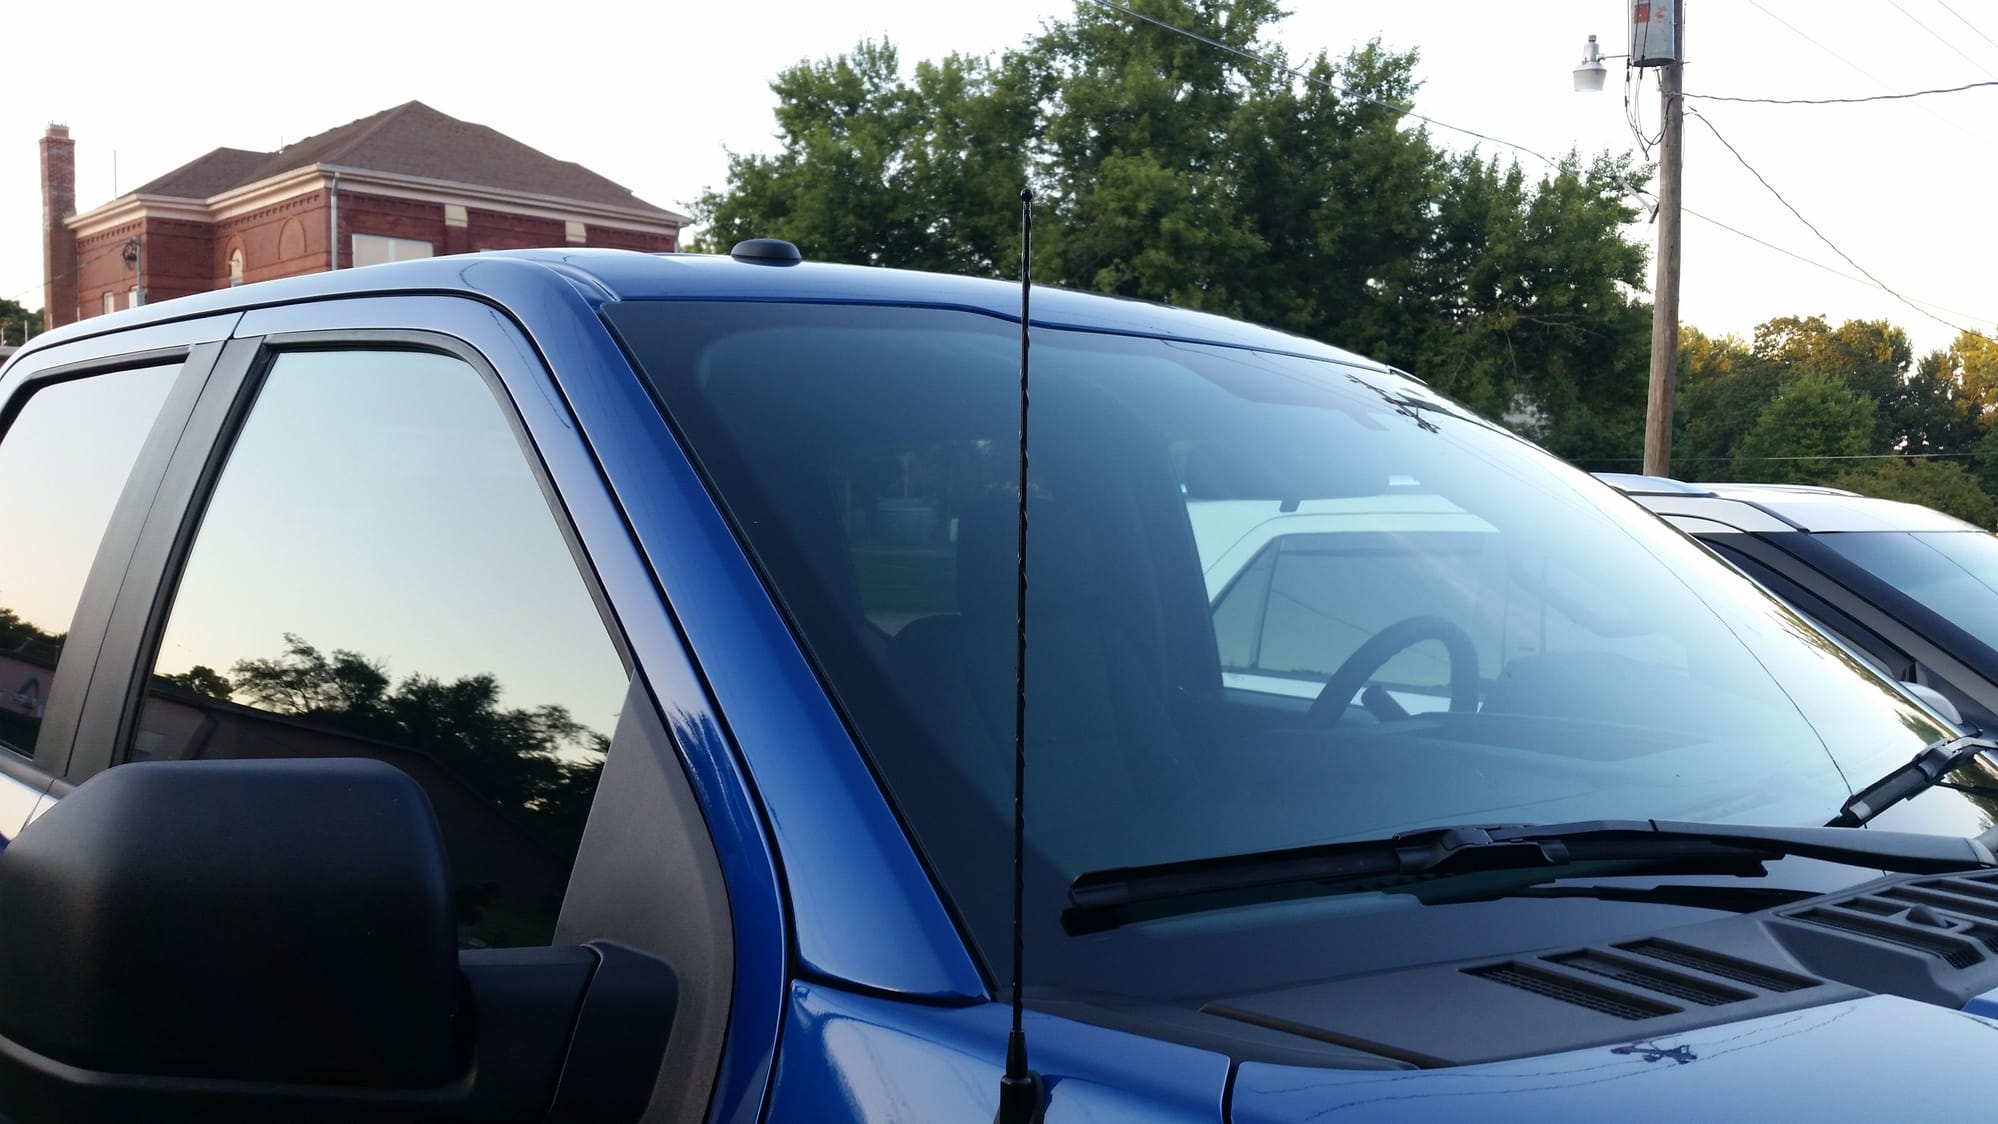 Shorter antenna Page 3 Ford F150 Forum Community of Ford Truck Fans